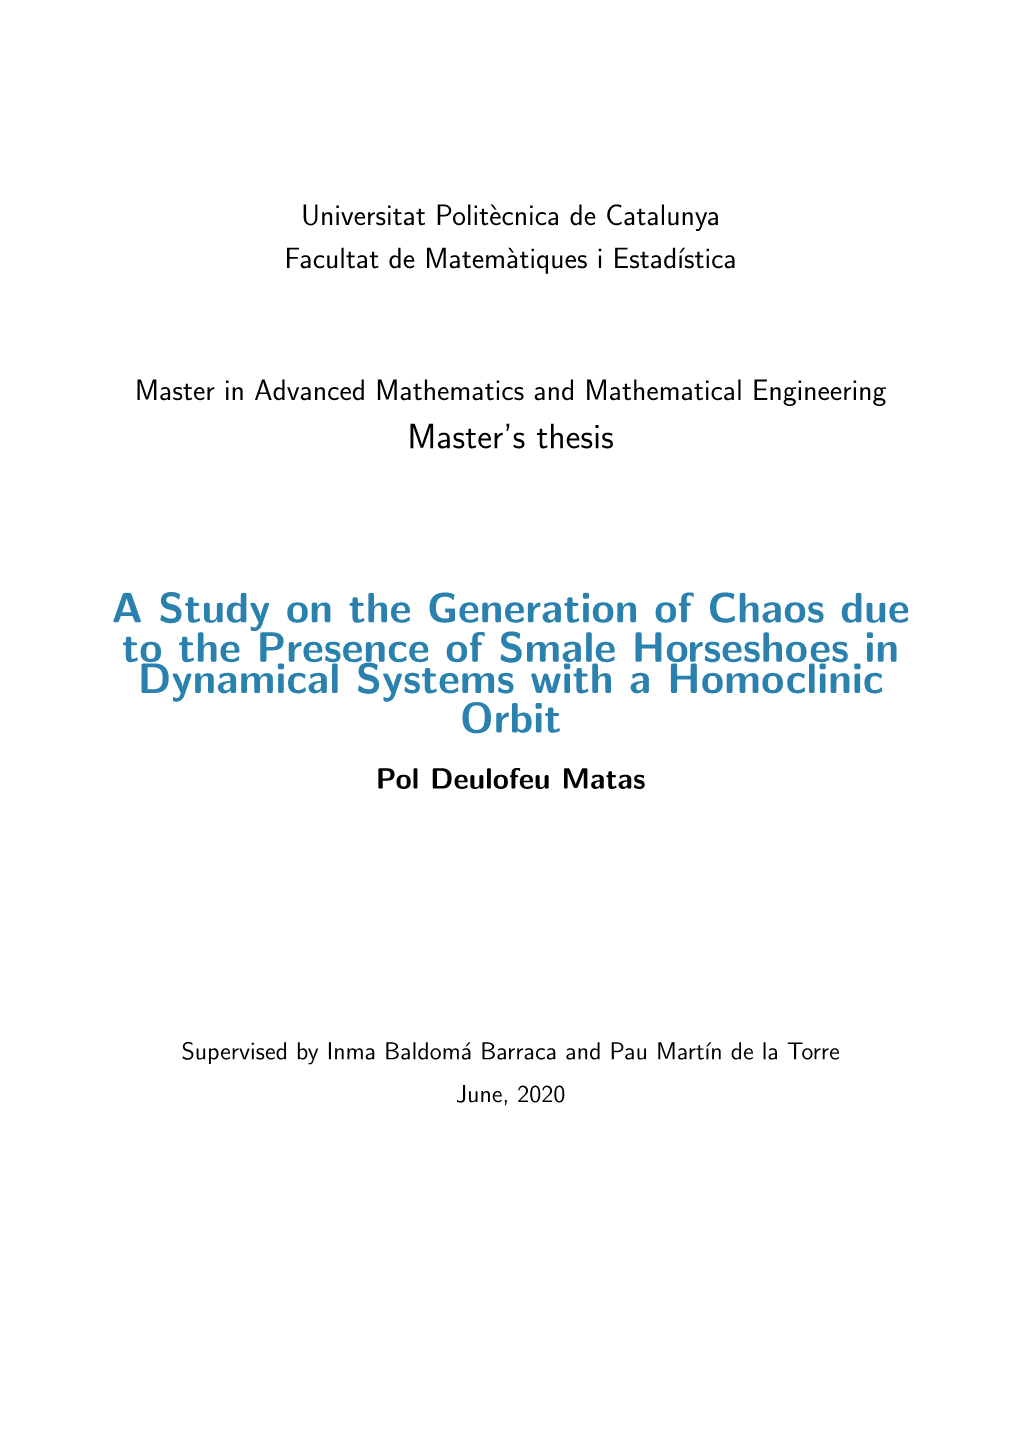 A Study on the Generation of Chaos Due to the Presence of Smale Horseshoes in Dynamical Systems with a Homoclinic Orbit Pol Deulofeu Matas